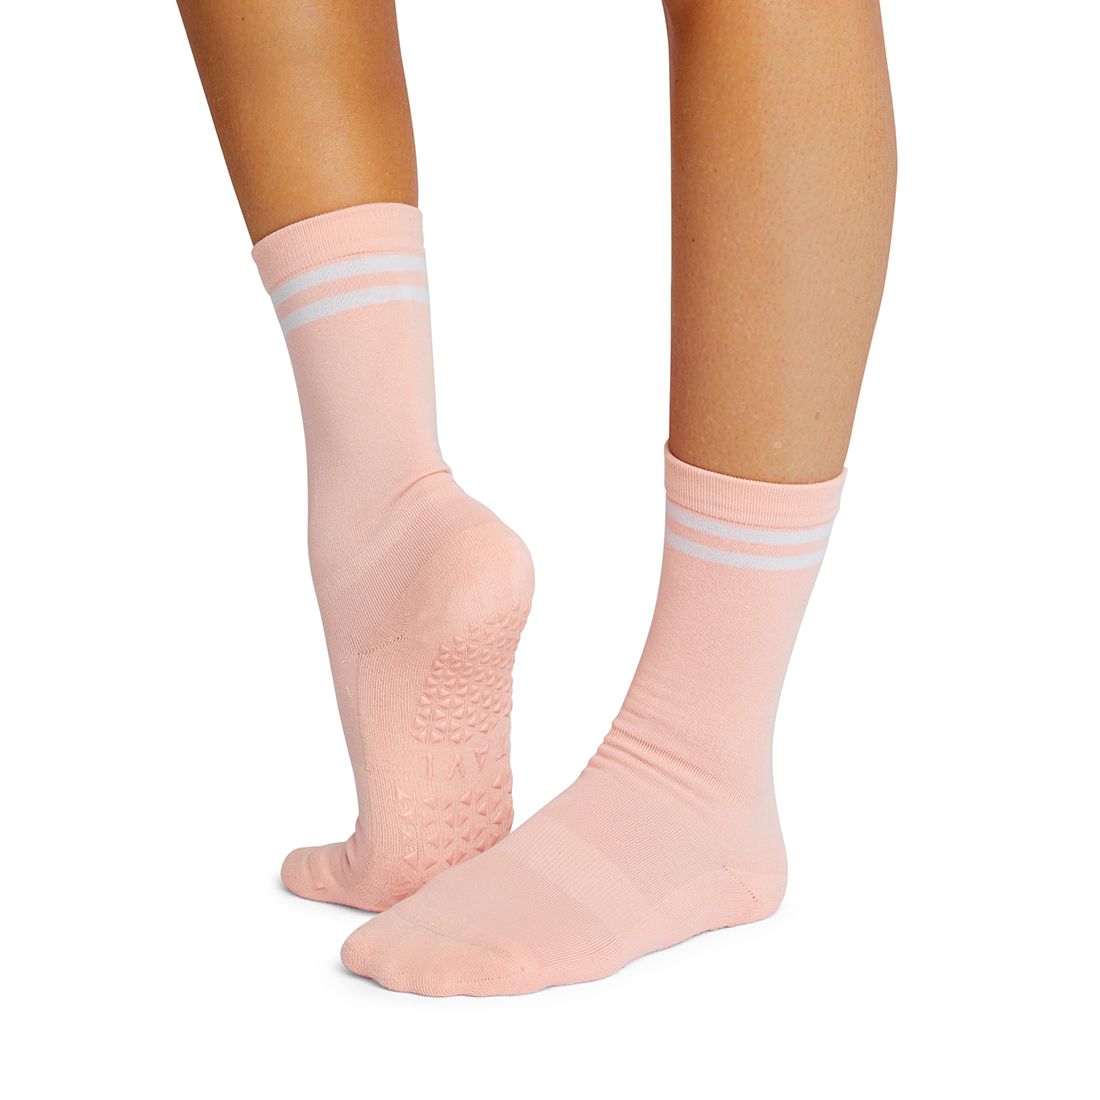 Yoga Full Toe Socks with Grips - XWH 22067 - IdeaStage Promotional Products